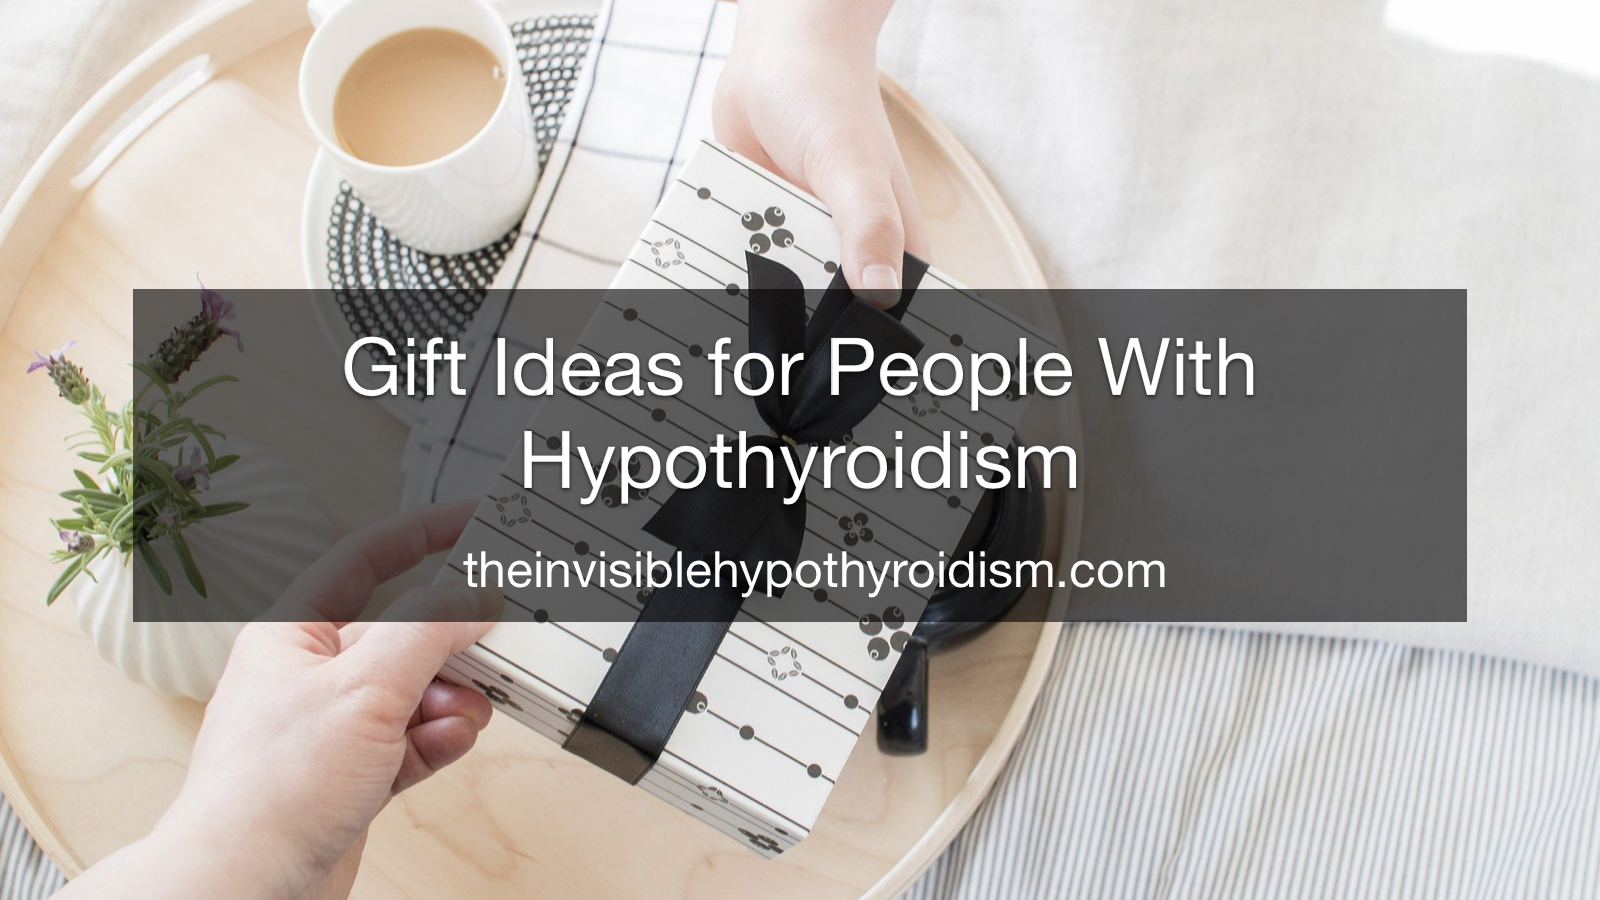 Gift Ideas for People With Hypothyroidism